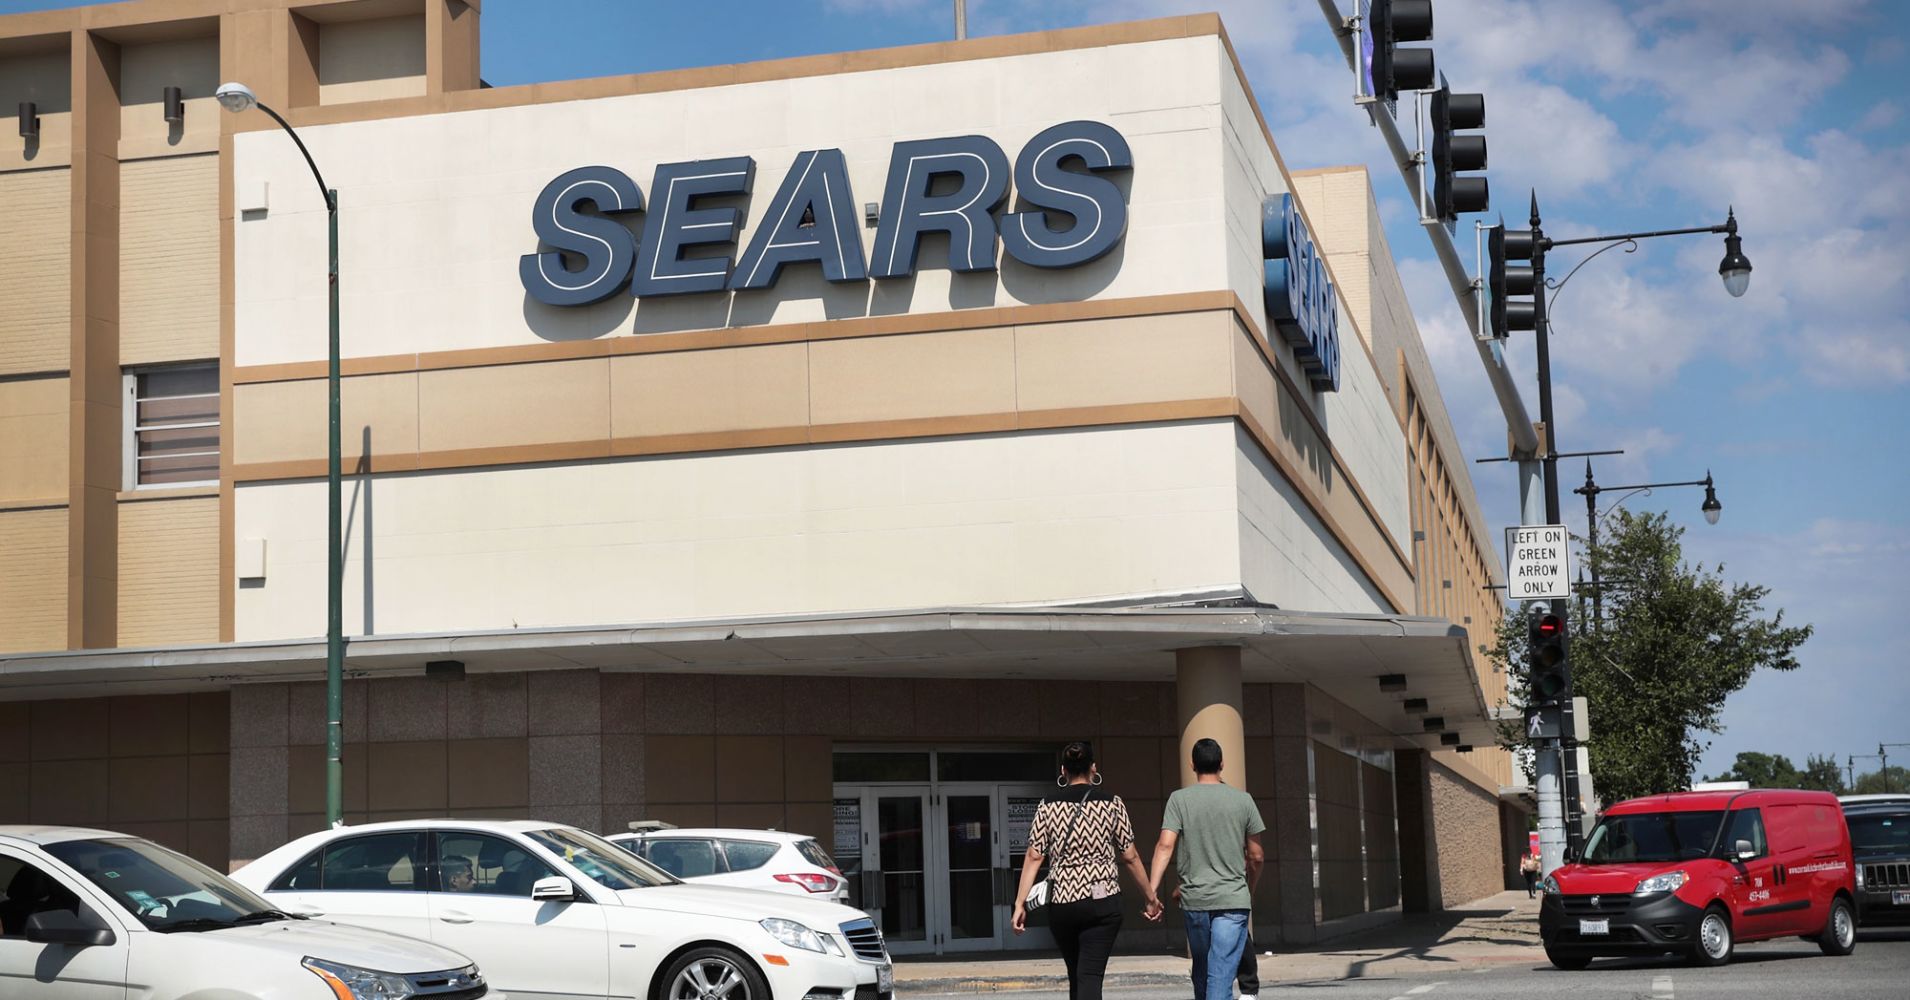 Sears unveils a new logo as it tries to boost its business